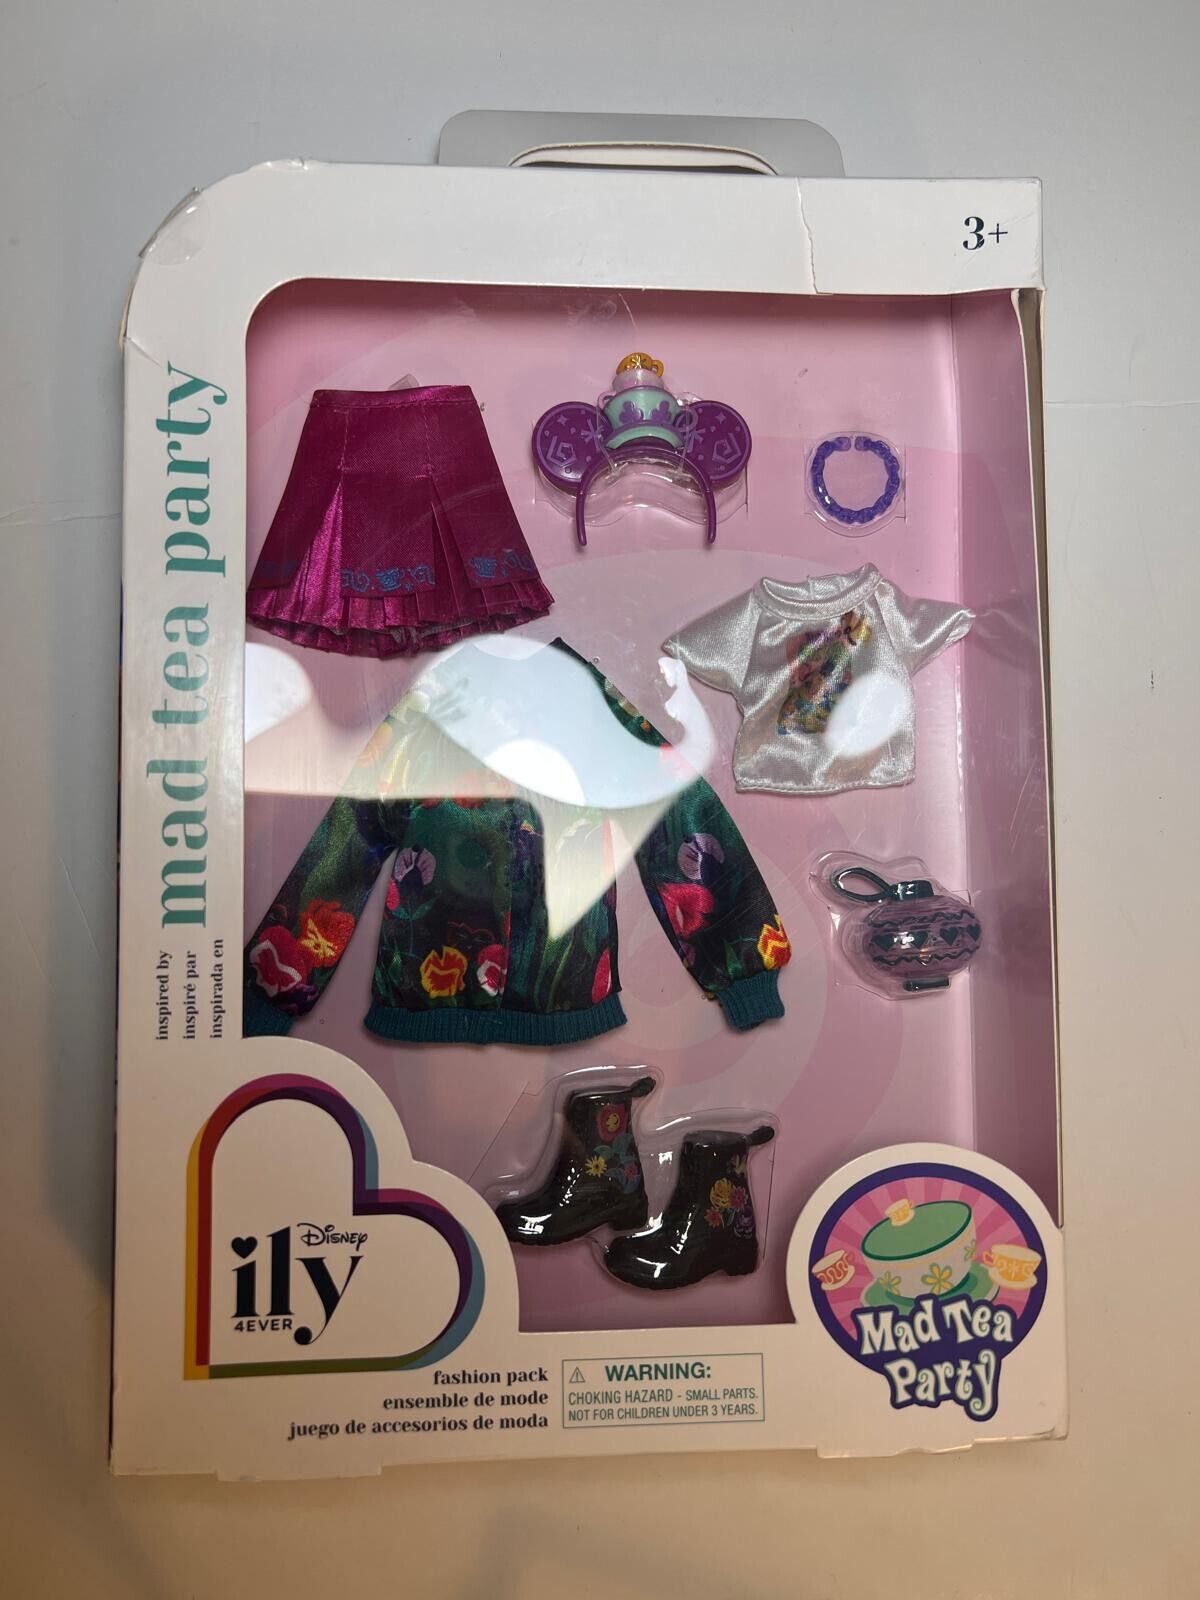 Disney ily 4EVER Fashion Pack Mad Tea Party New with Box  